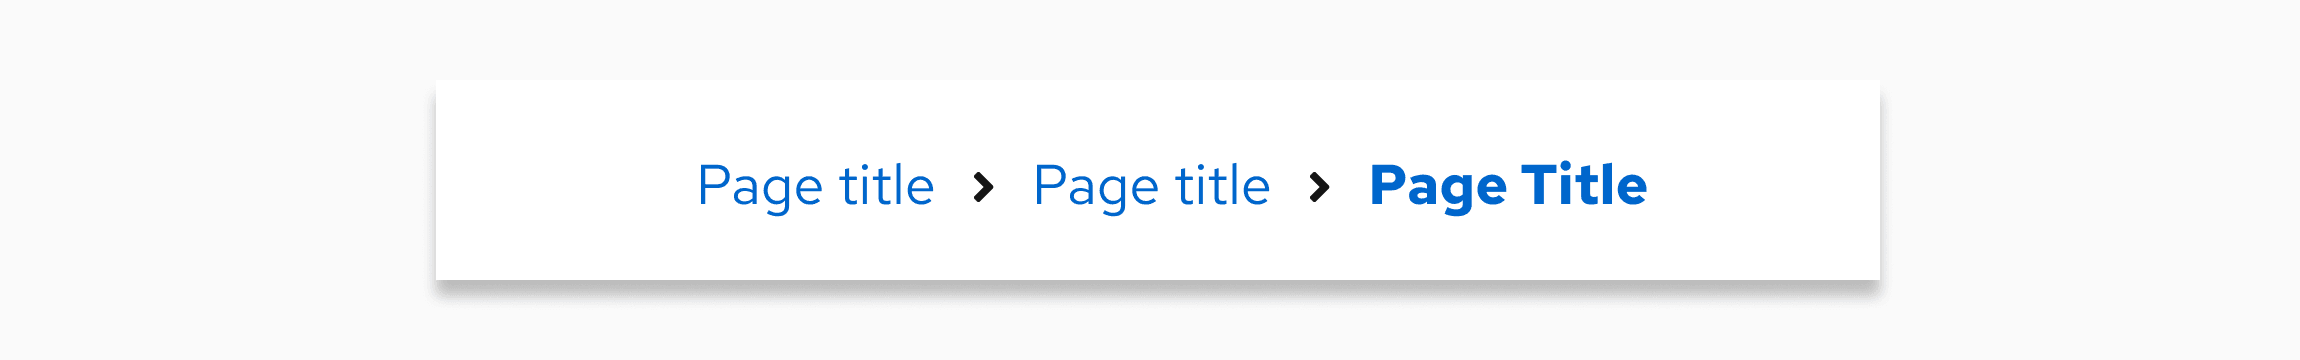 A breadcrumb trail with mixed capitalization styles due to page title formatting.